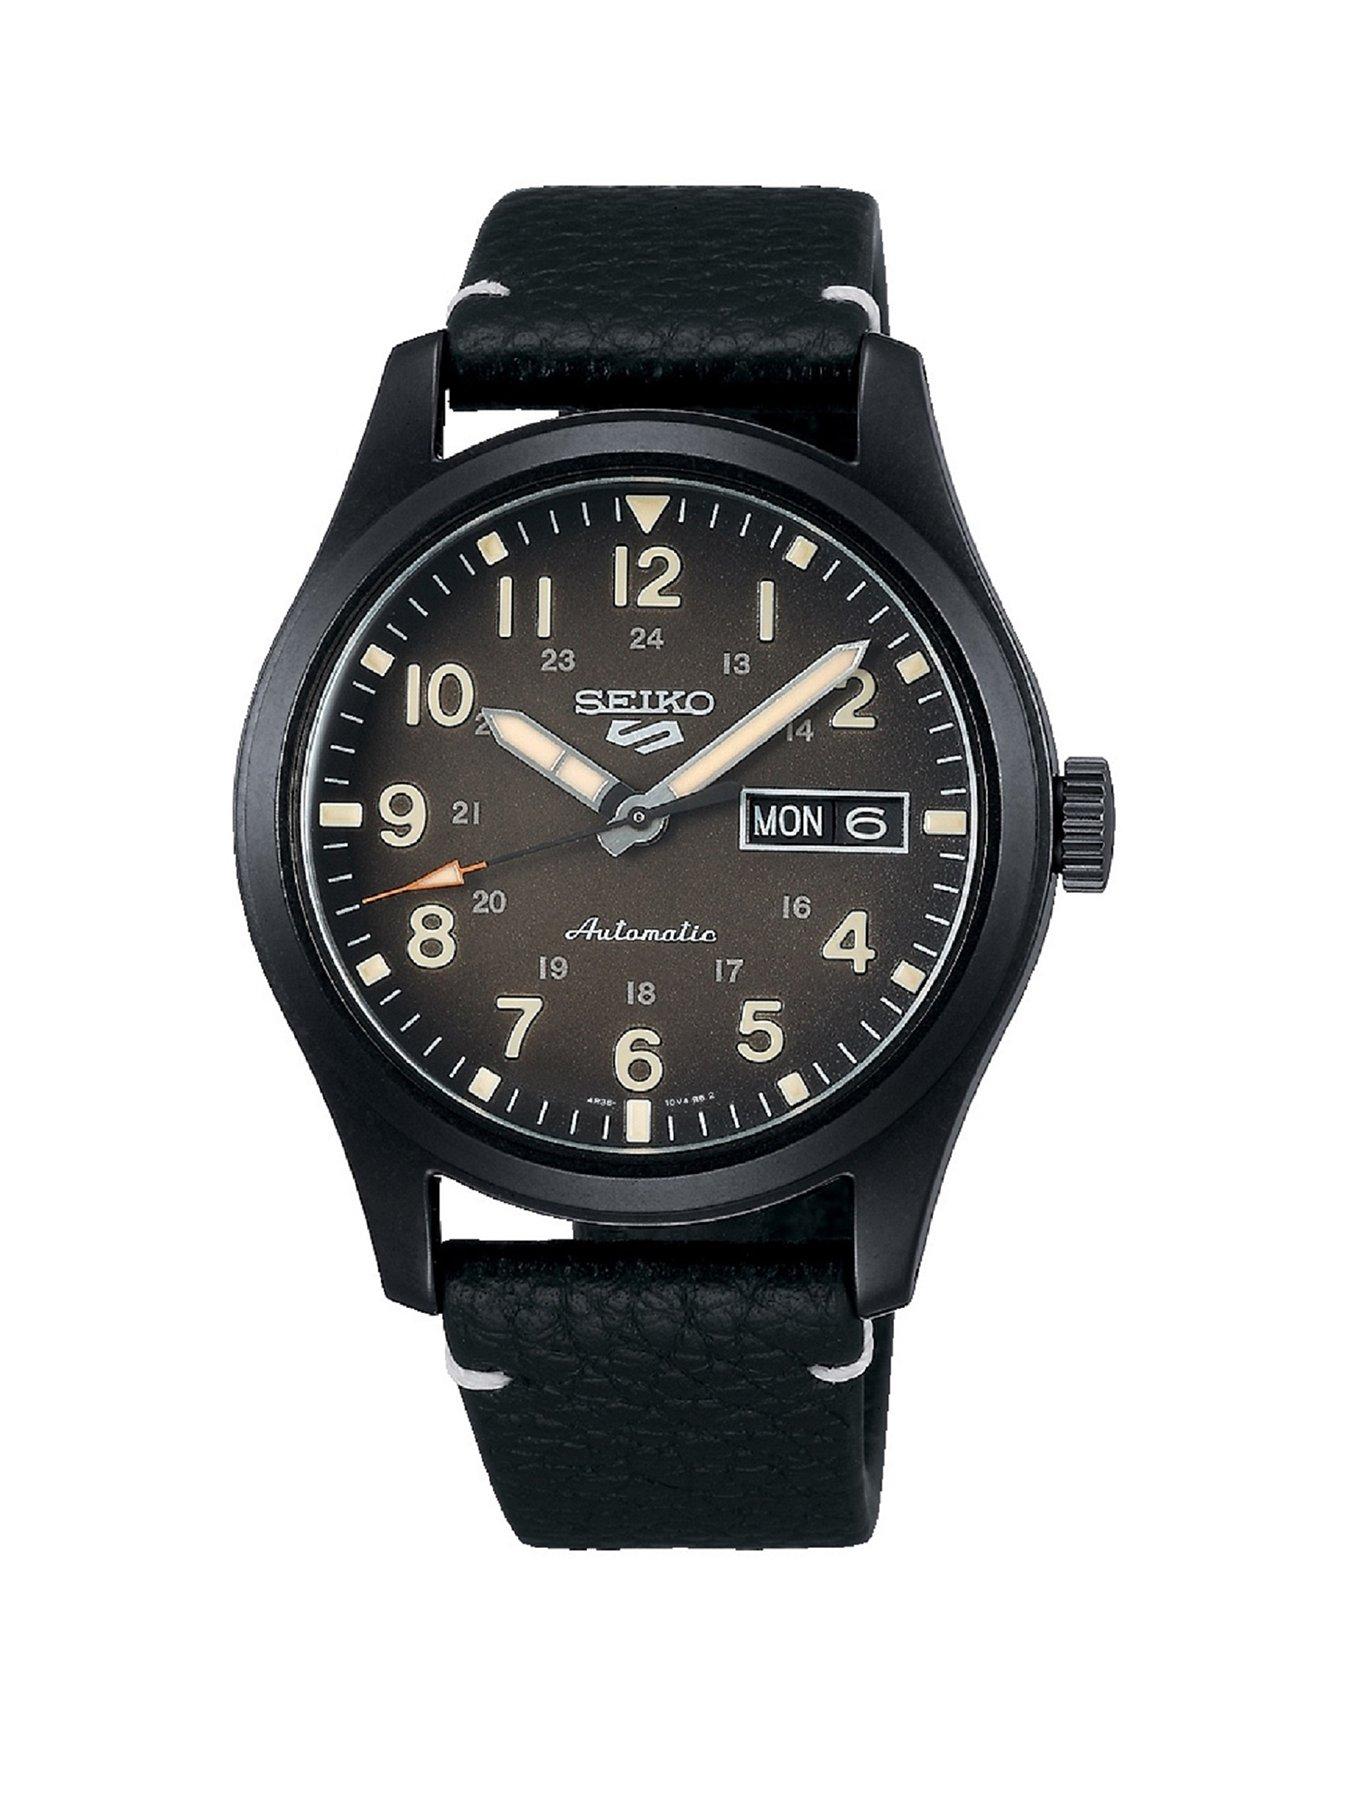  Seiko 5 Sports - Field Collection Leather Men's Watch